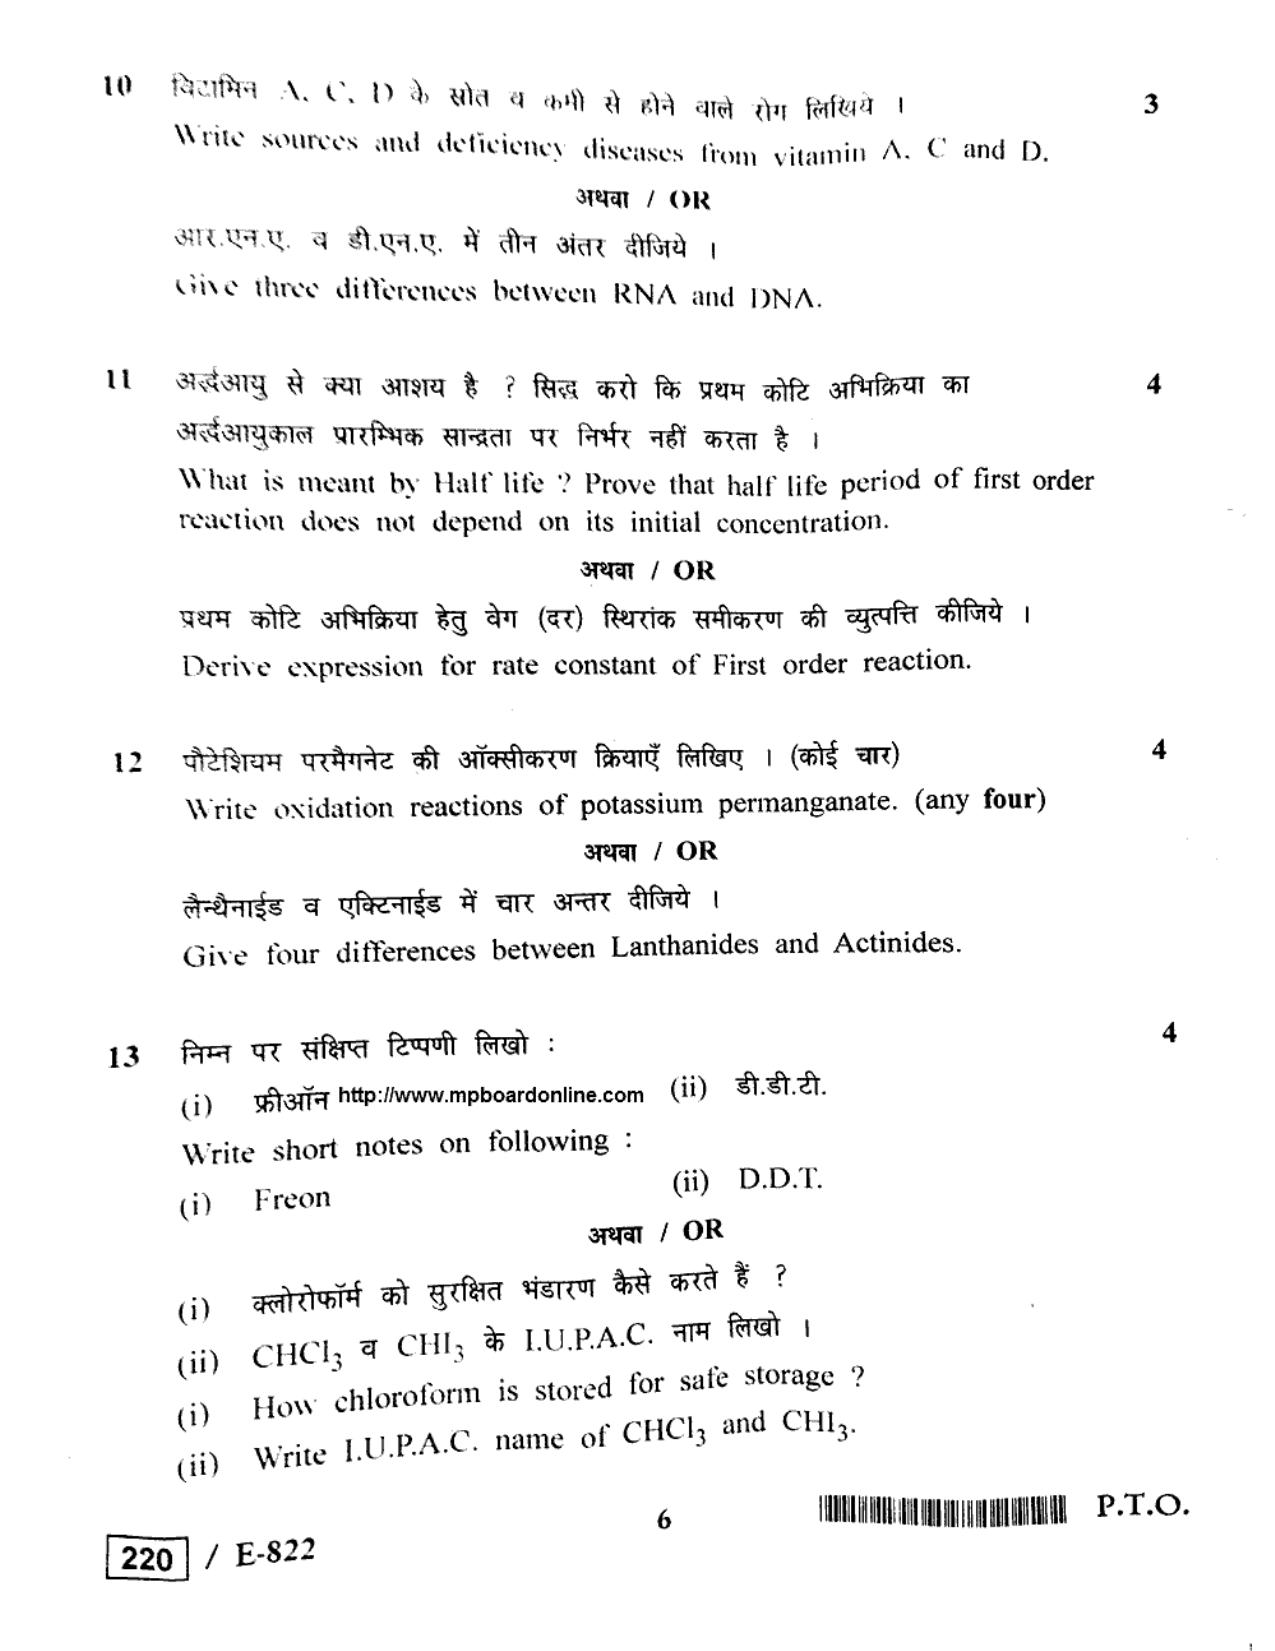 MP Board Class 12 Chemistry 2020 Question Paper - Page 6